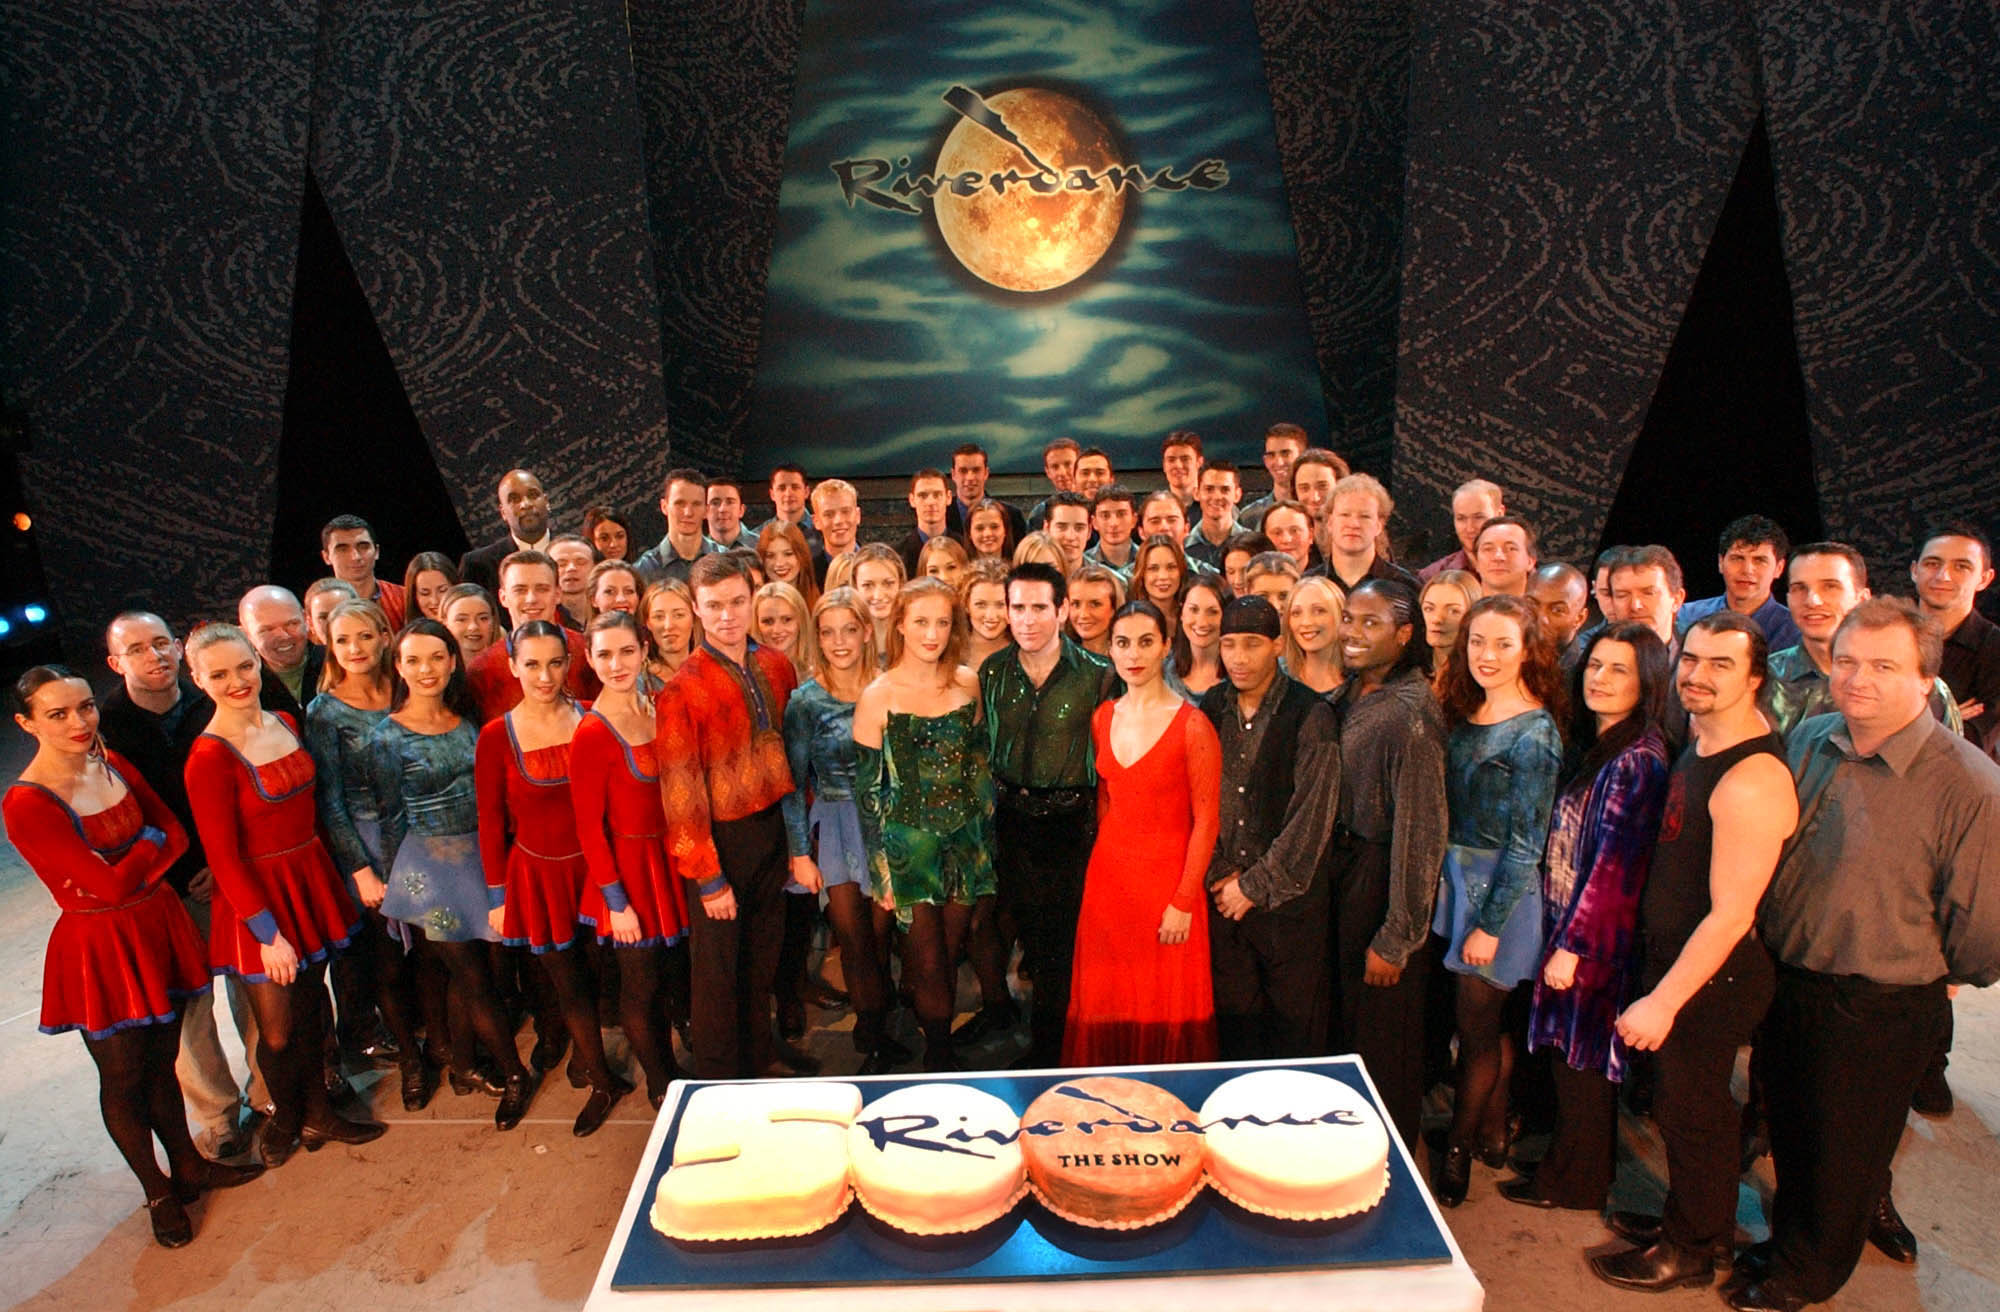 The cast and crew mark the 5000th performance in Edinburgh in March 2002